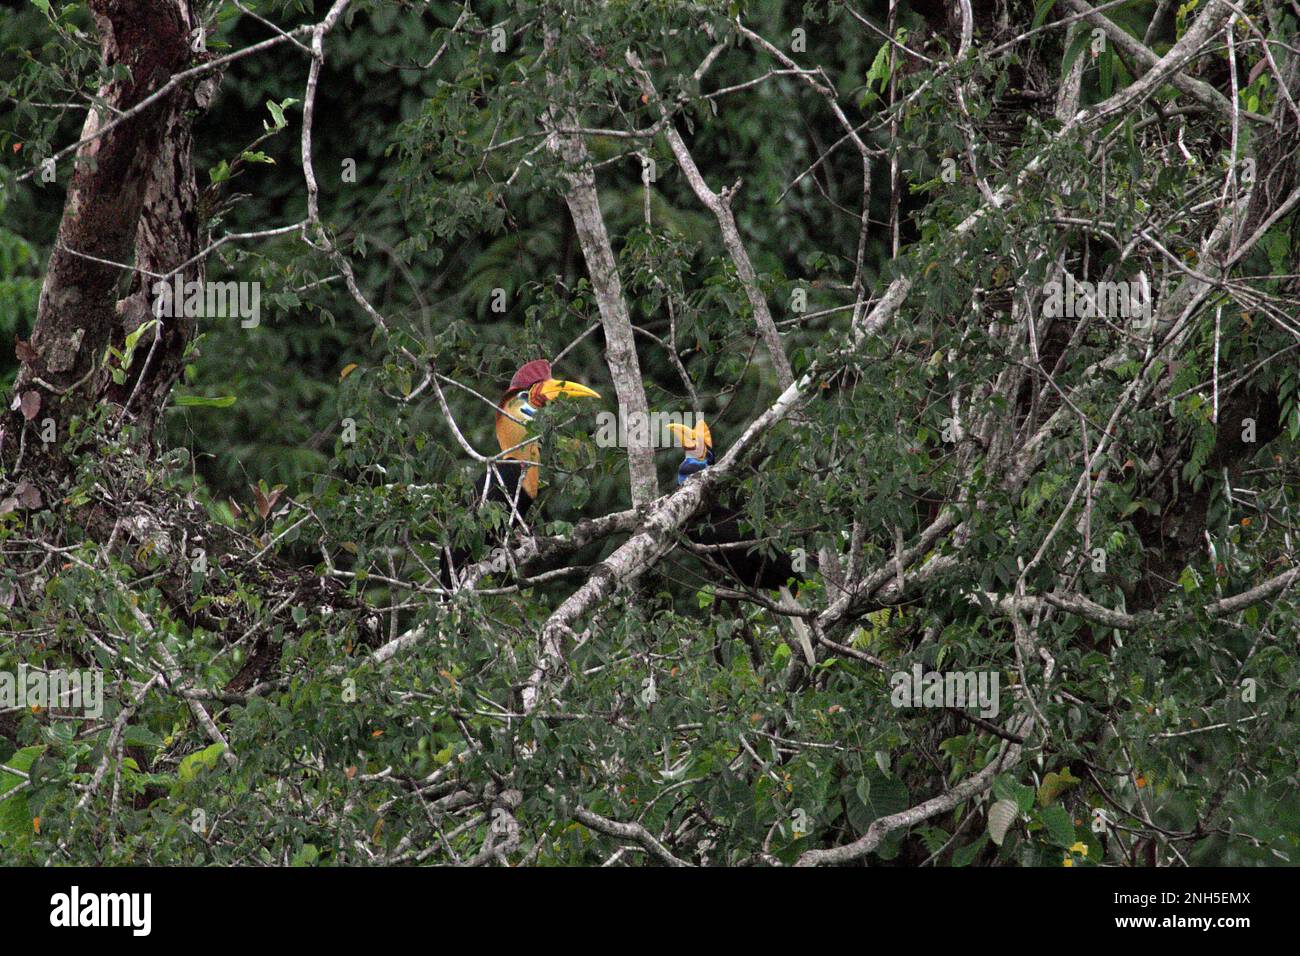 A pair of knobbed hornbills, or sometimes called Sulawesi wrinkled hornbill (Rhyticeros cassidix), is photographed as they are foraging on a tree in a rainforest area near Mount Tangkoko and Duasudara in Bitung, North Sulawesi, Indonesia. 'Hornbills are diurnal species that mostly travel in pairs and remain monogamous,' wrote Amanda Hackett of Wildlife Conservation Society in a 2022 publication. Play an important role in seed dispersal—often dubbed as forest farmer by ornithologists, hornbills 'keep the cycle of the forest growing and evolving with all the fruit they consume each day.' Stock Photo